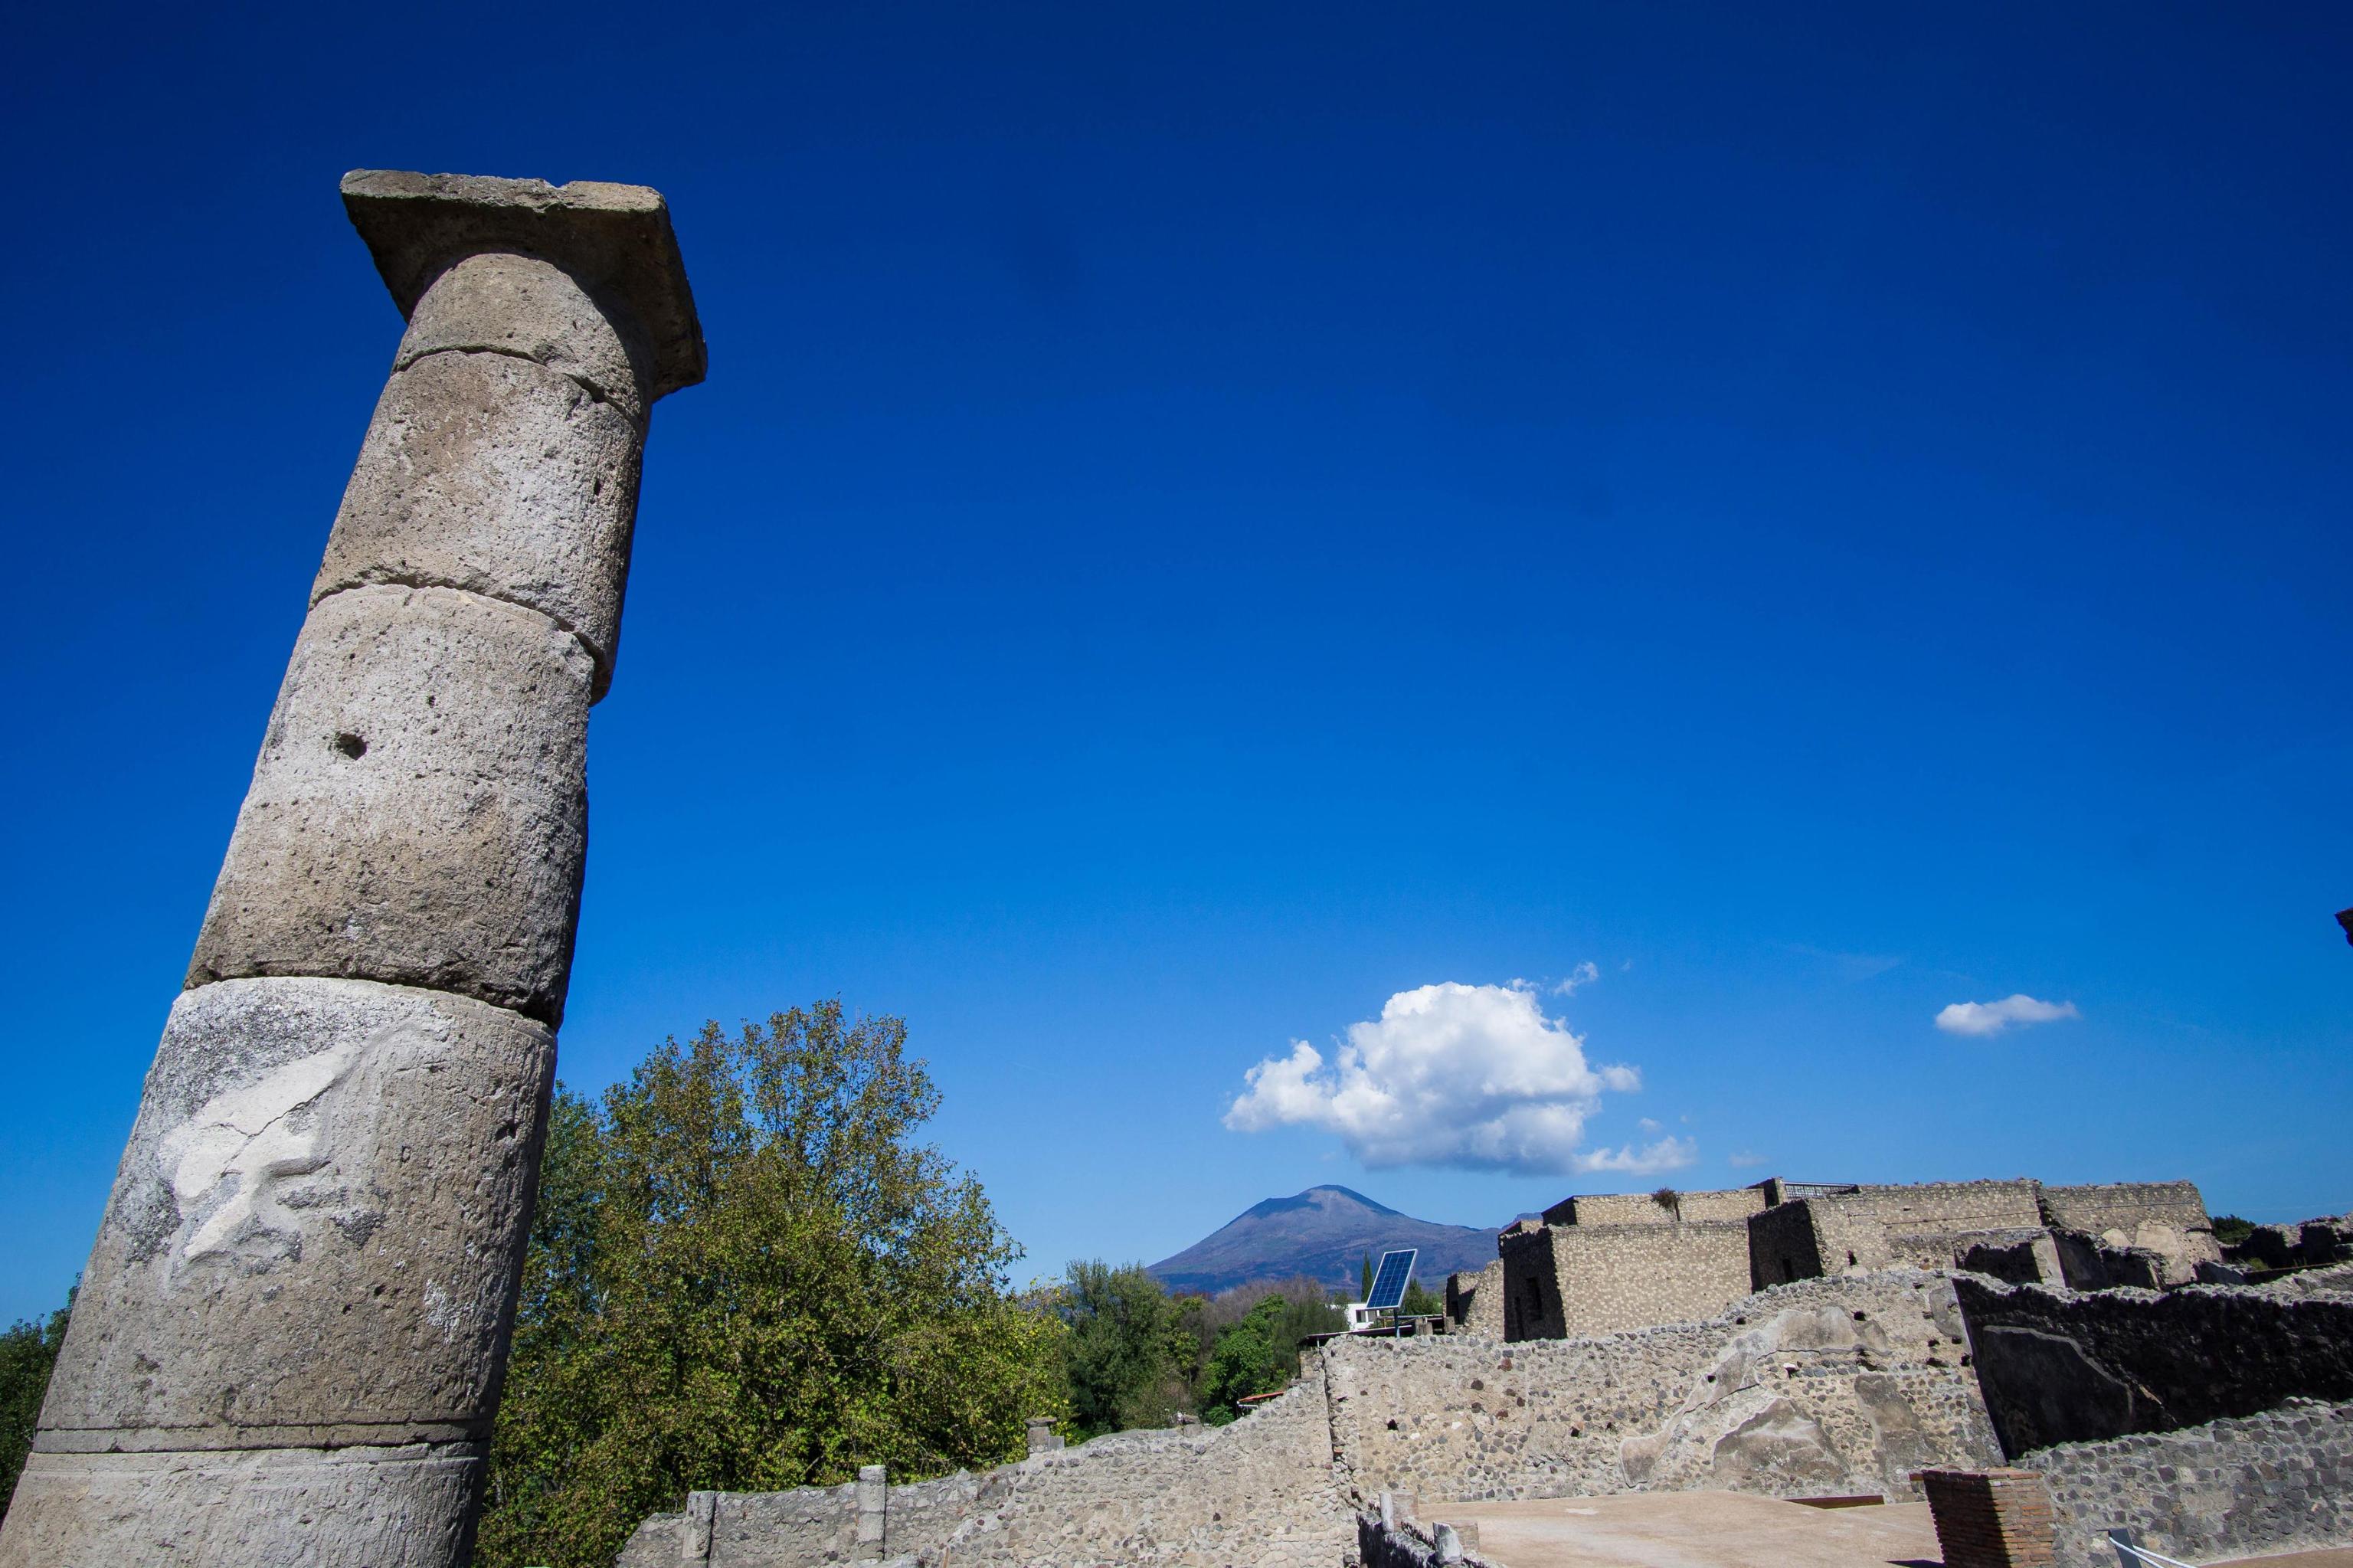 POMPEII: OPENING OF THE HOUSE OF THE SAILOR